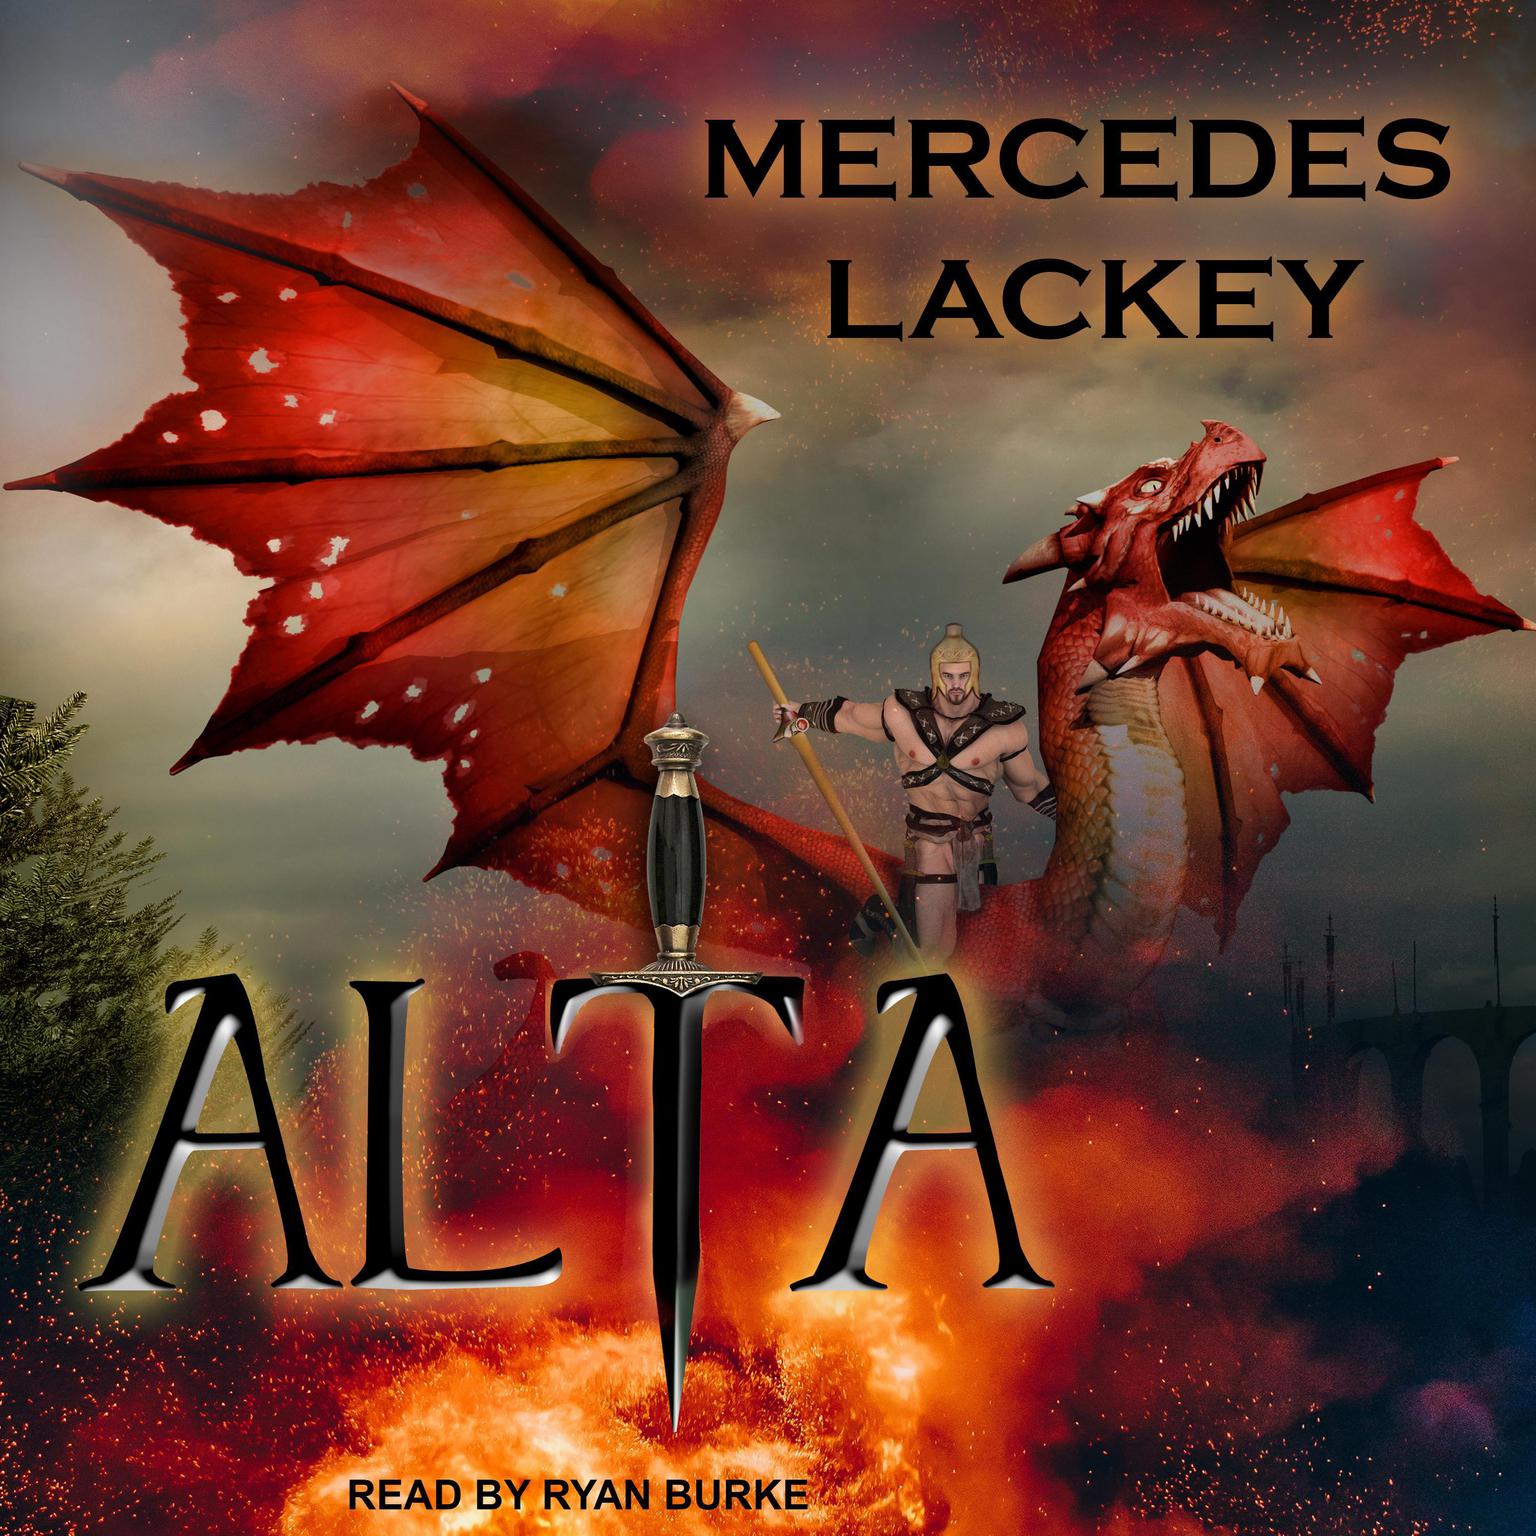 Alta Audiobook, by Mercedes Lackey